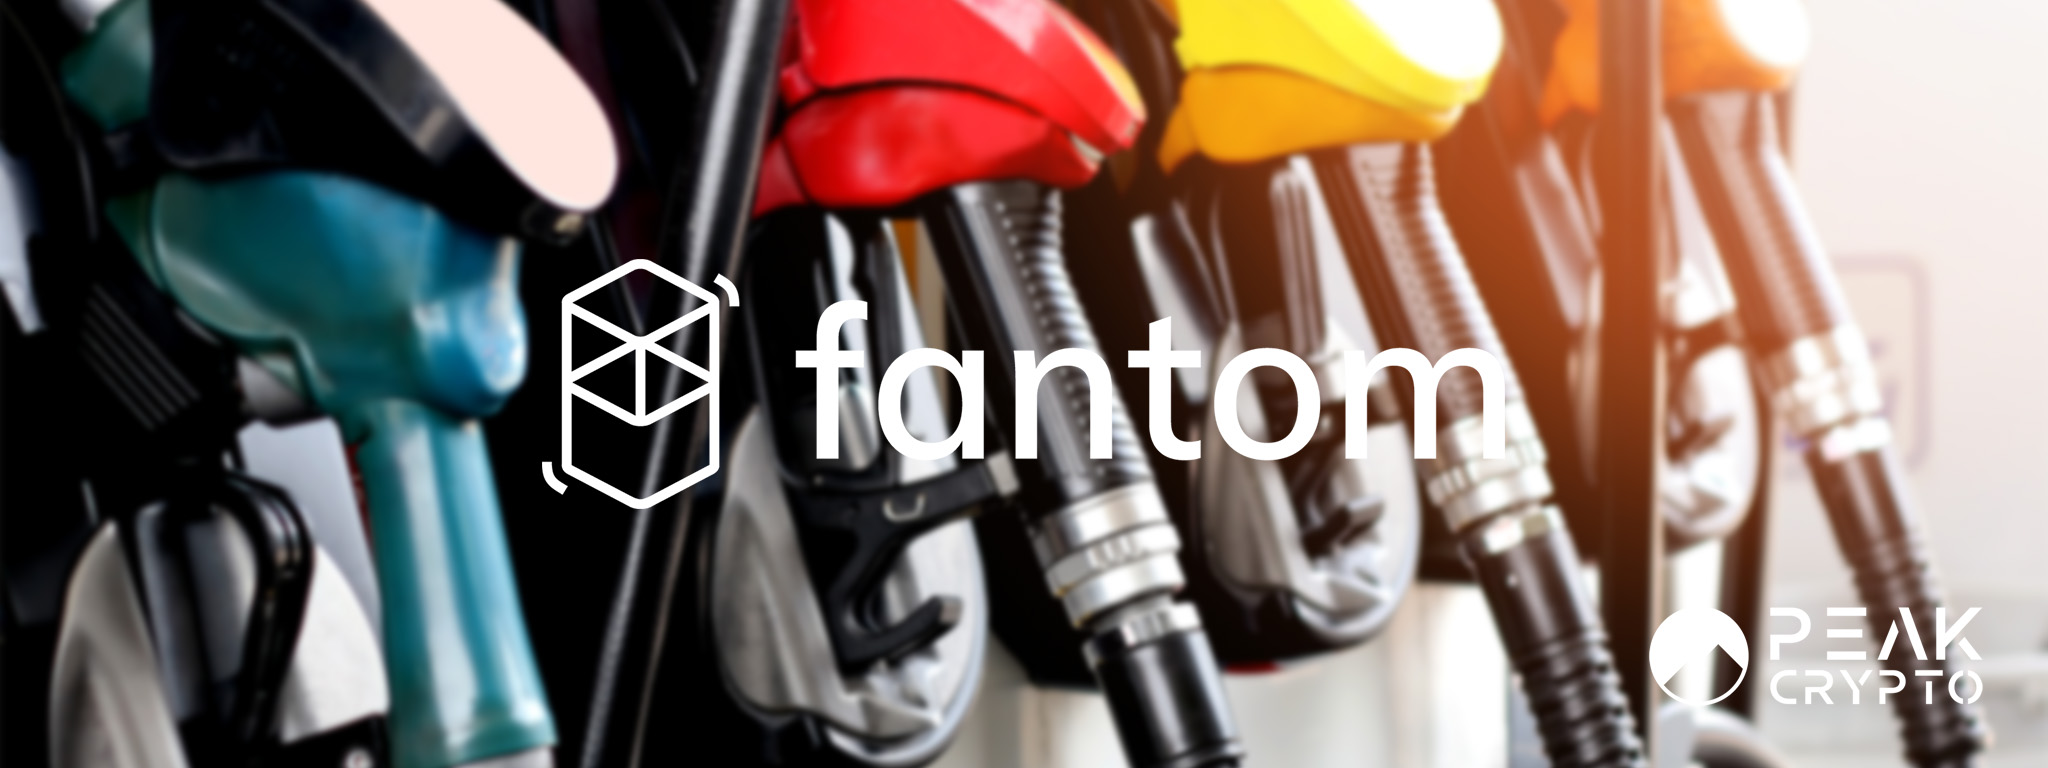 Fantom Introduces Program to Pay Developers for Gas Fees